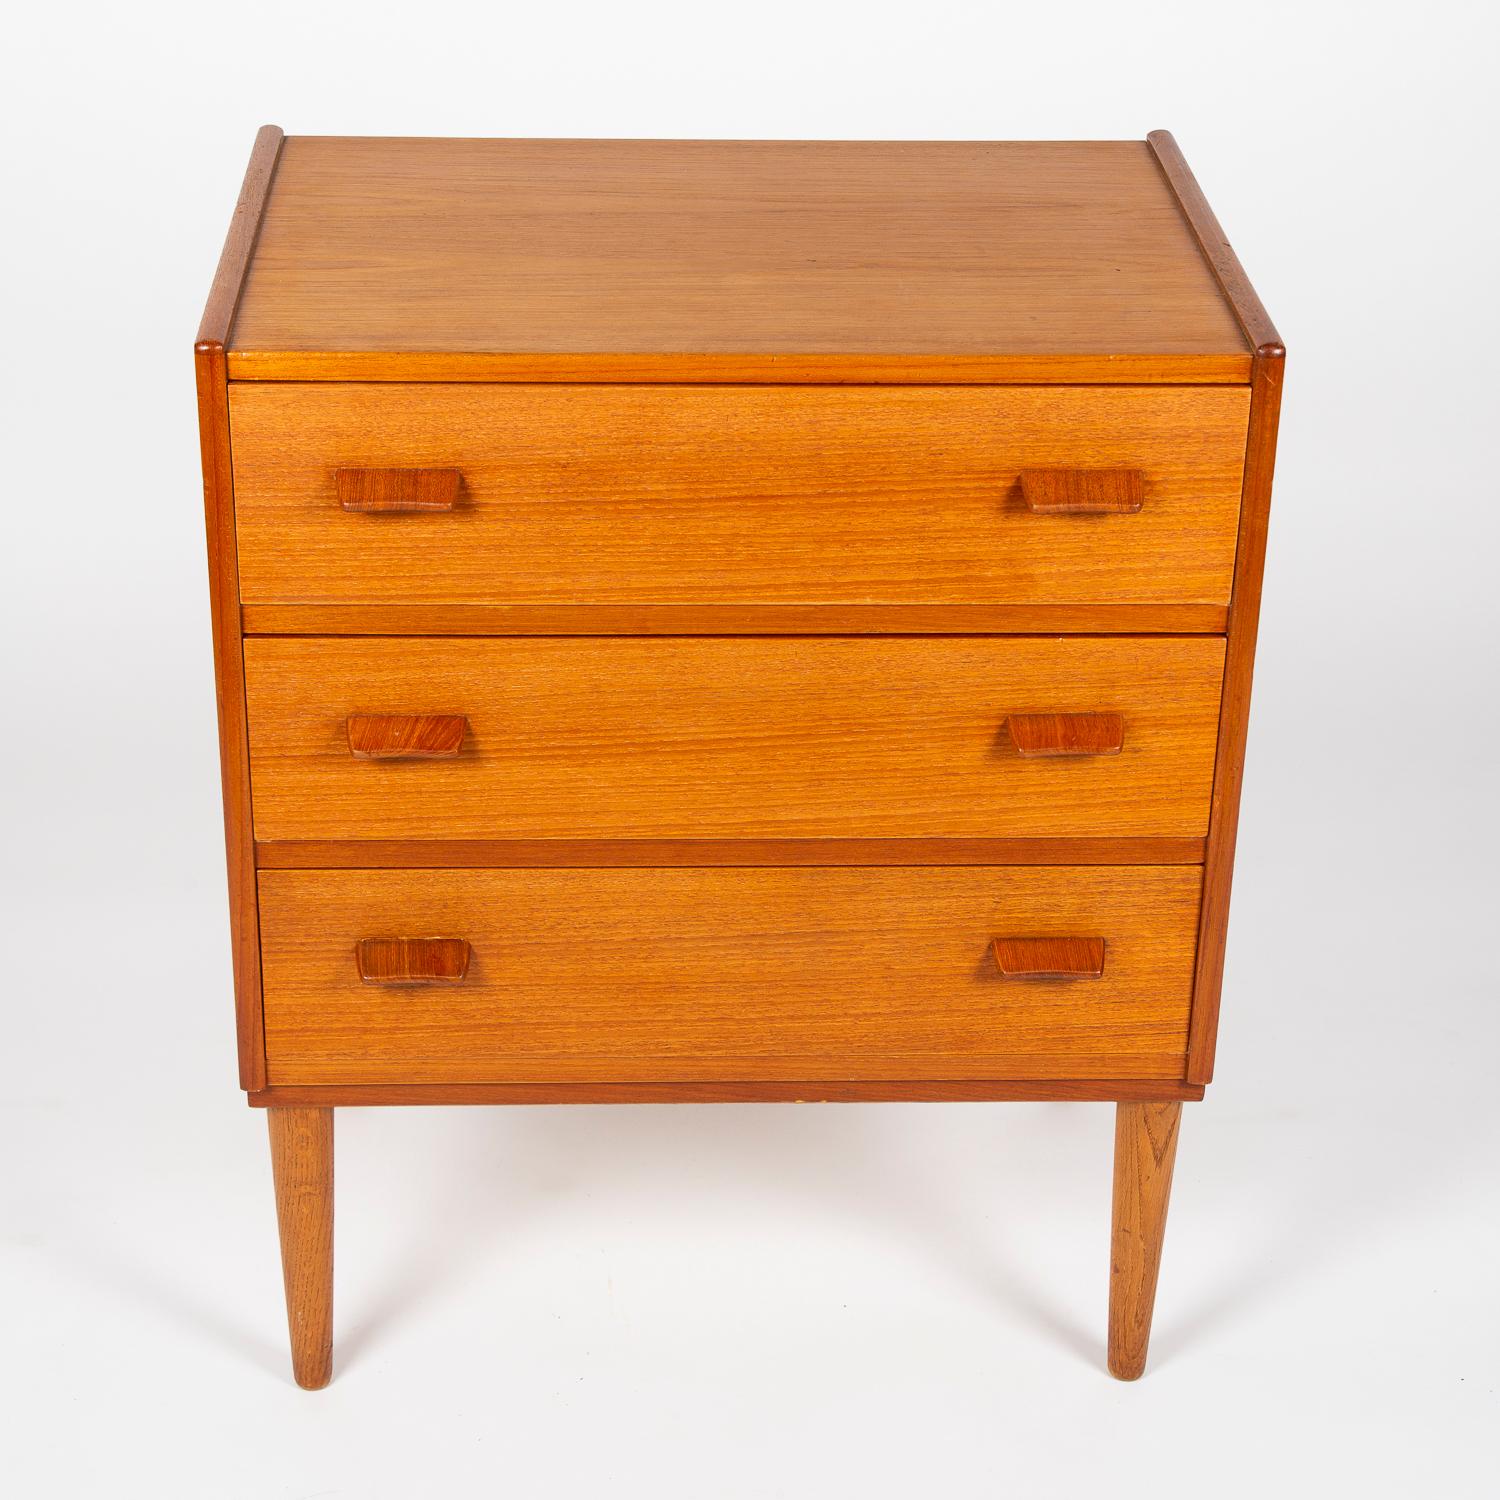 Danish Teak Chest of Drawers Design by Poul Volther